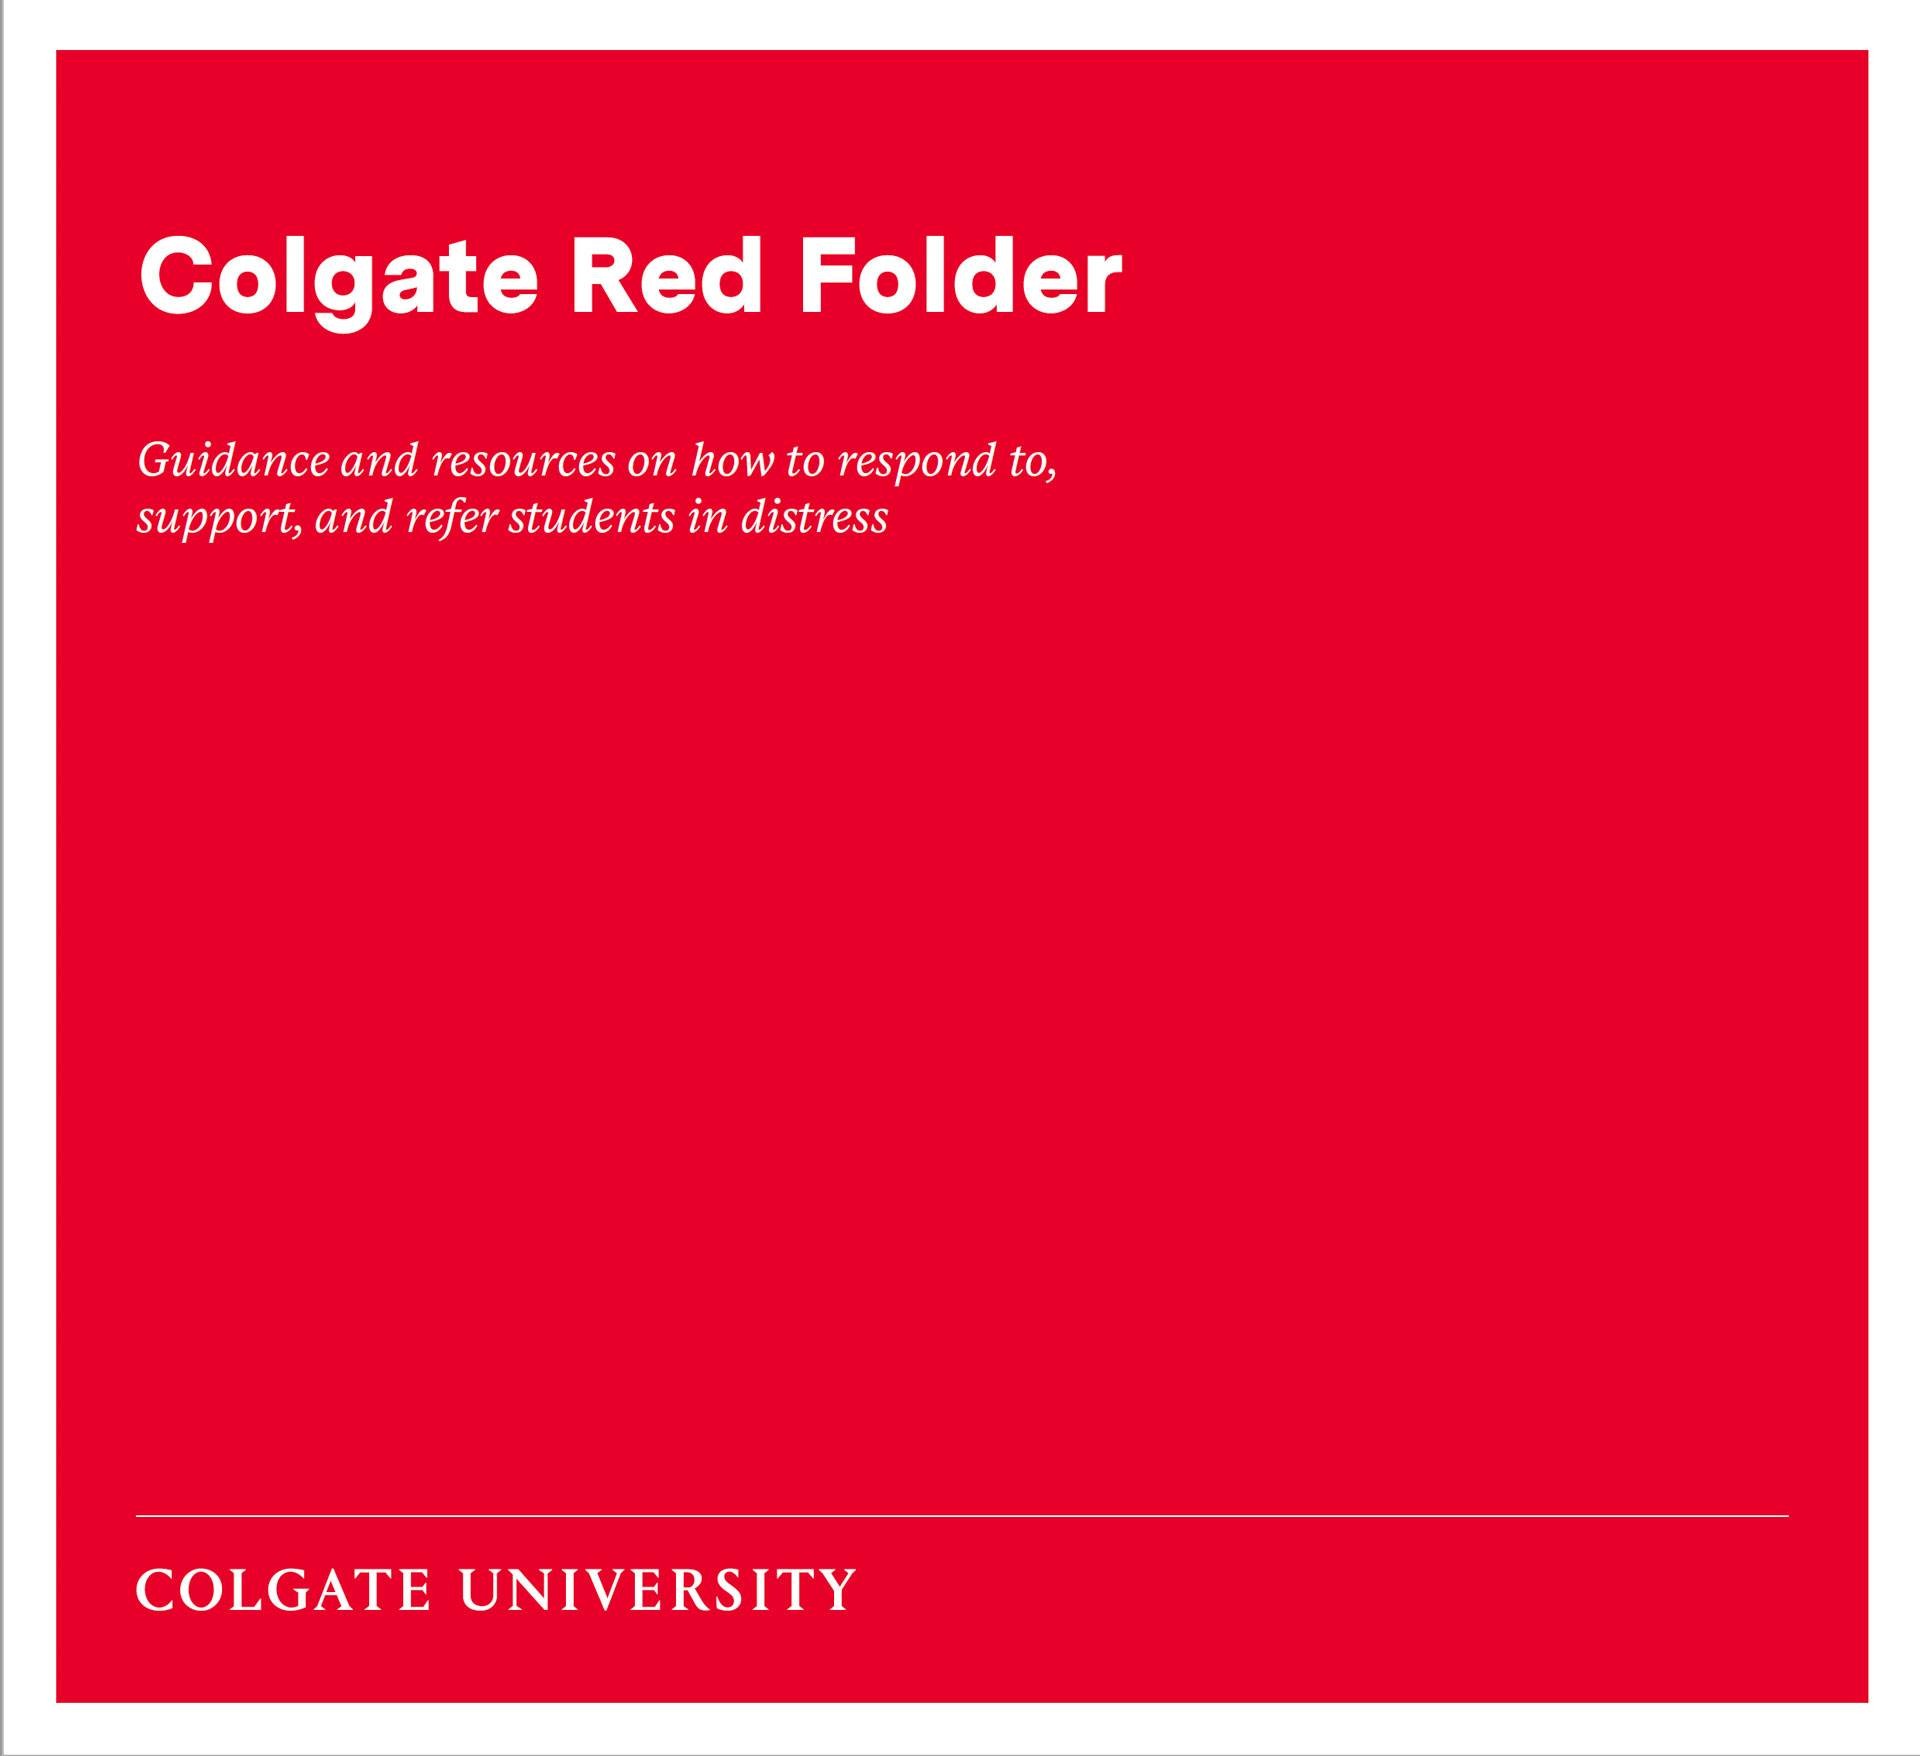 Cover of Red Folder booklet